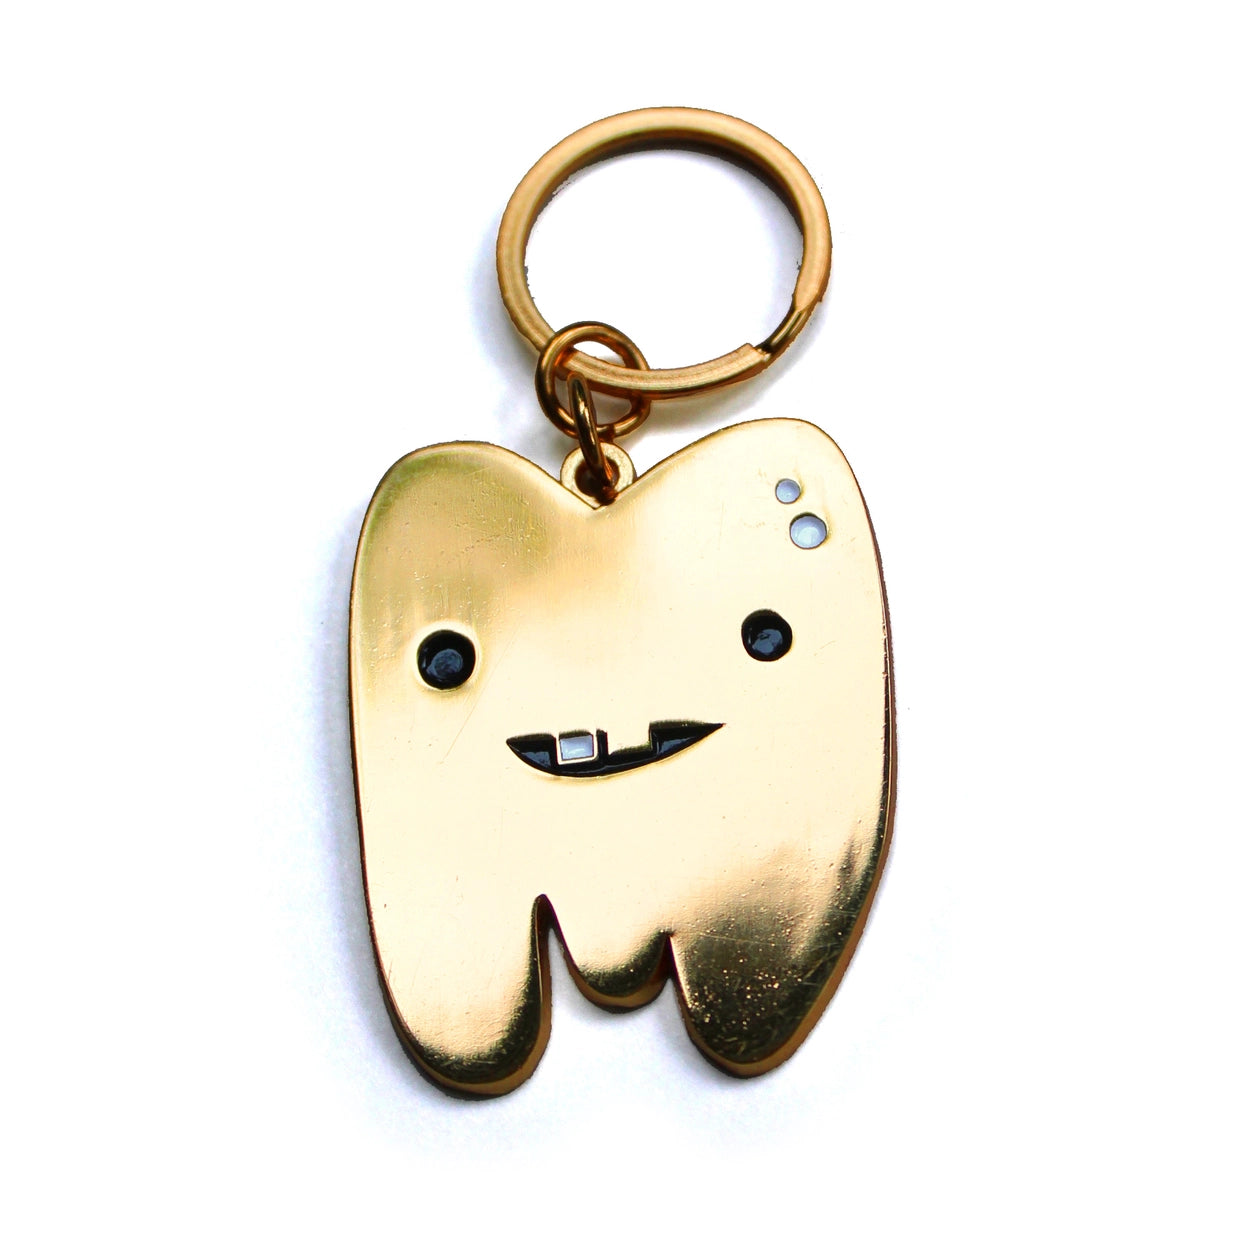 Keychain gold tooth - You can't handle the tooth!